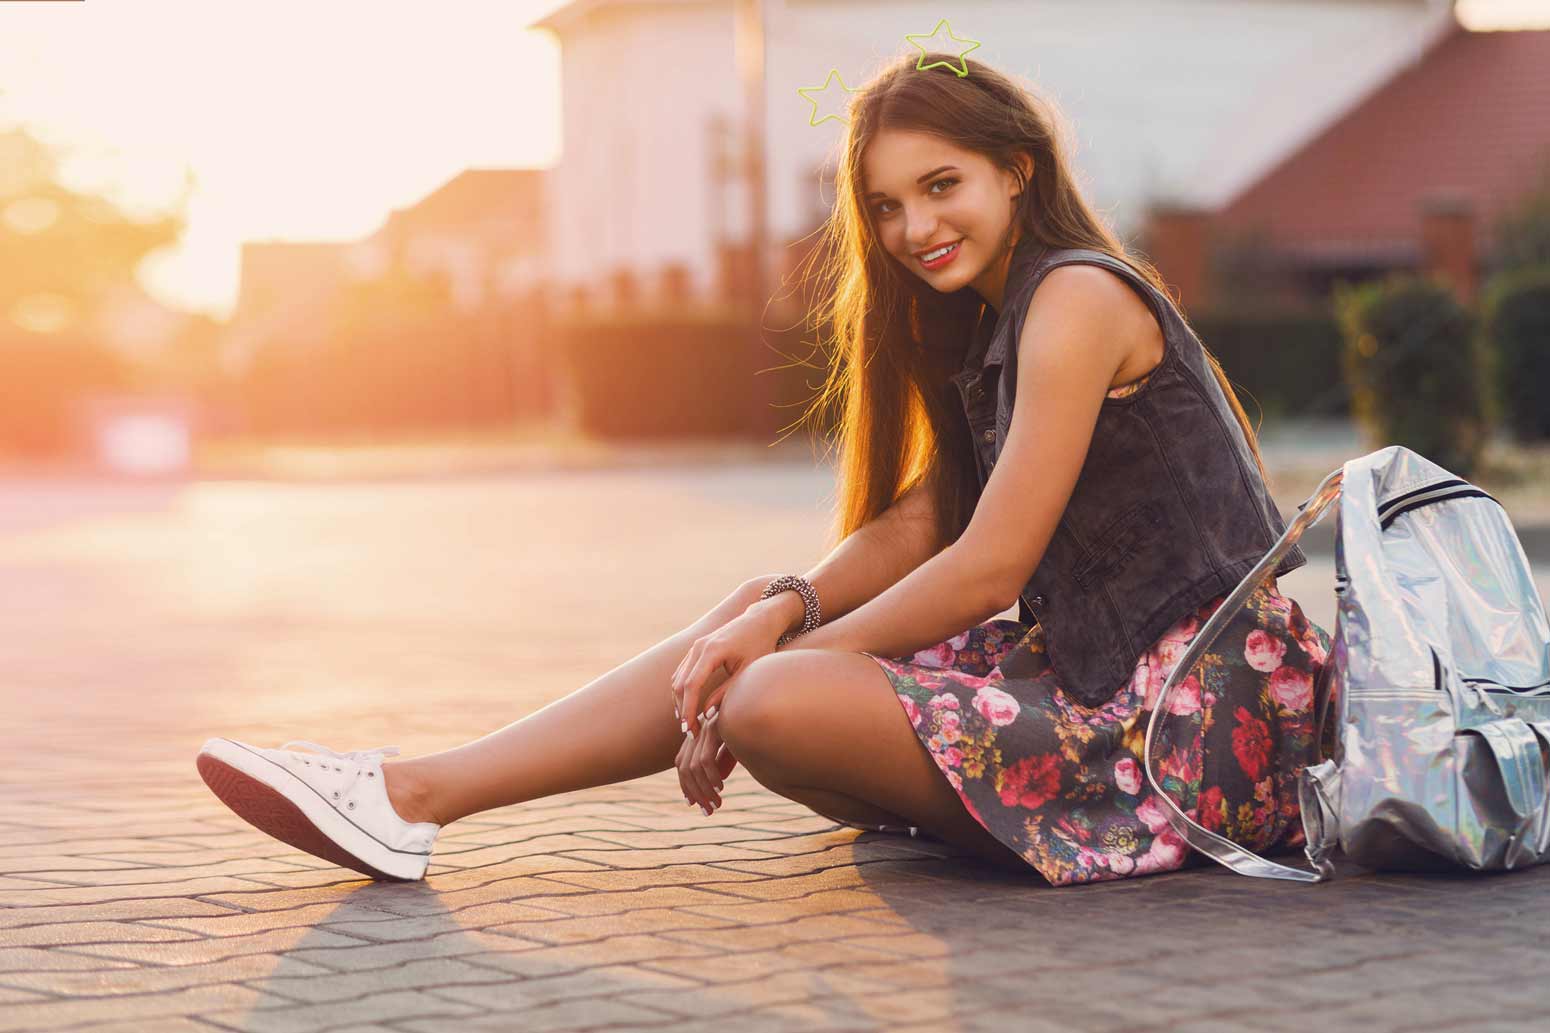 Teen girl wearing jean vest and flower skirt sitting on the pavement outside a building at daybreak smiling at the camera